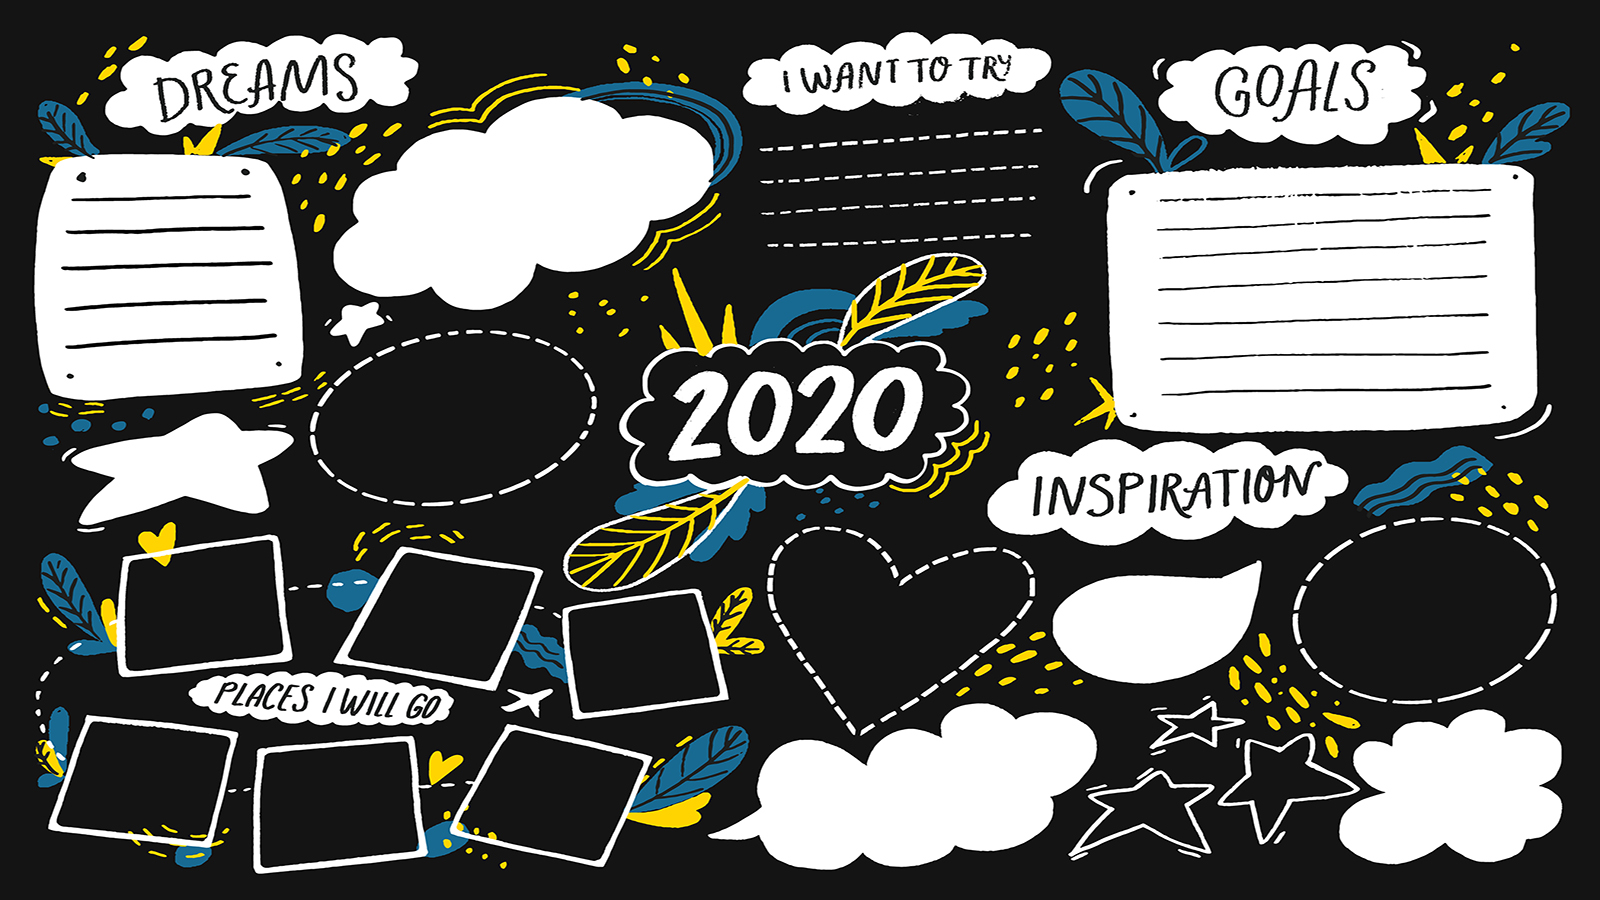 Put 2020 on a Vision Board - OT Toolkit™ Blog